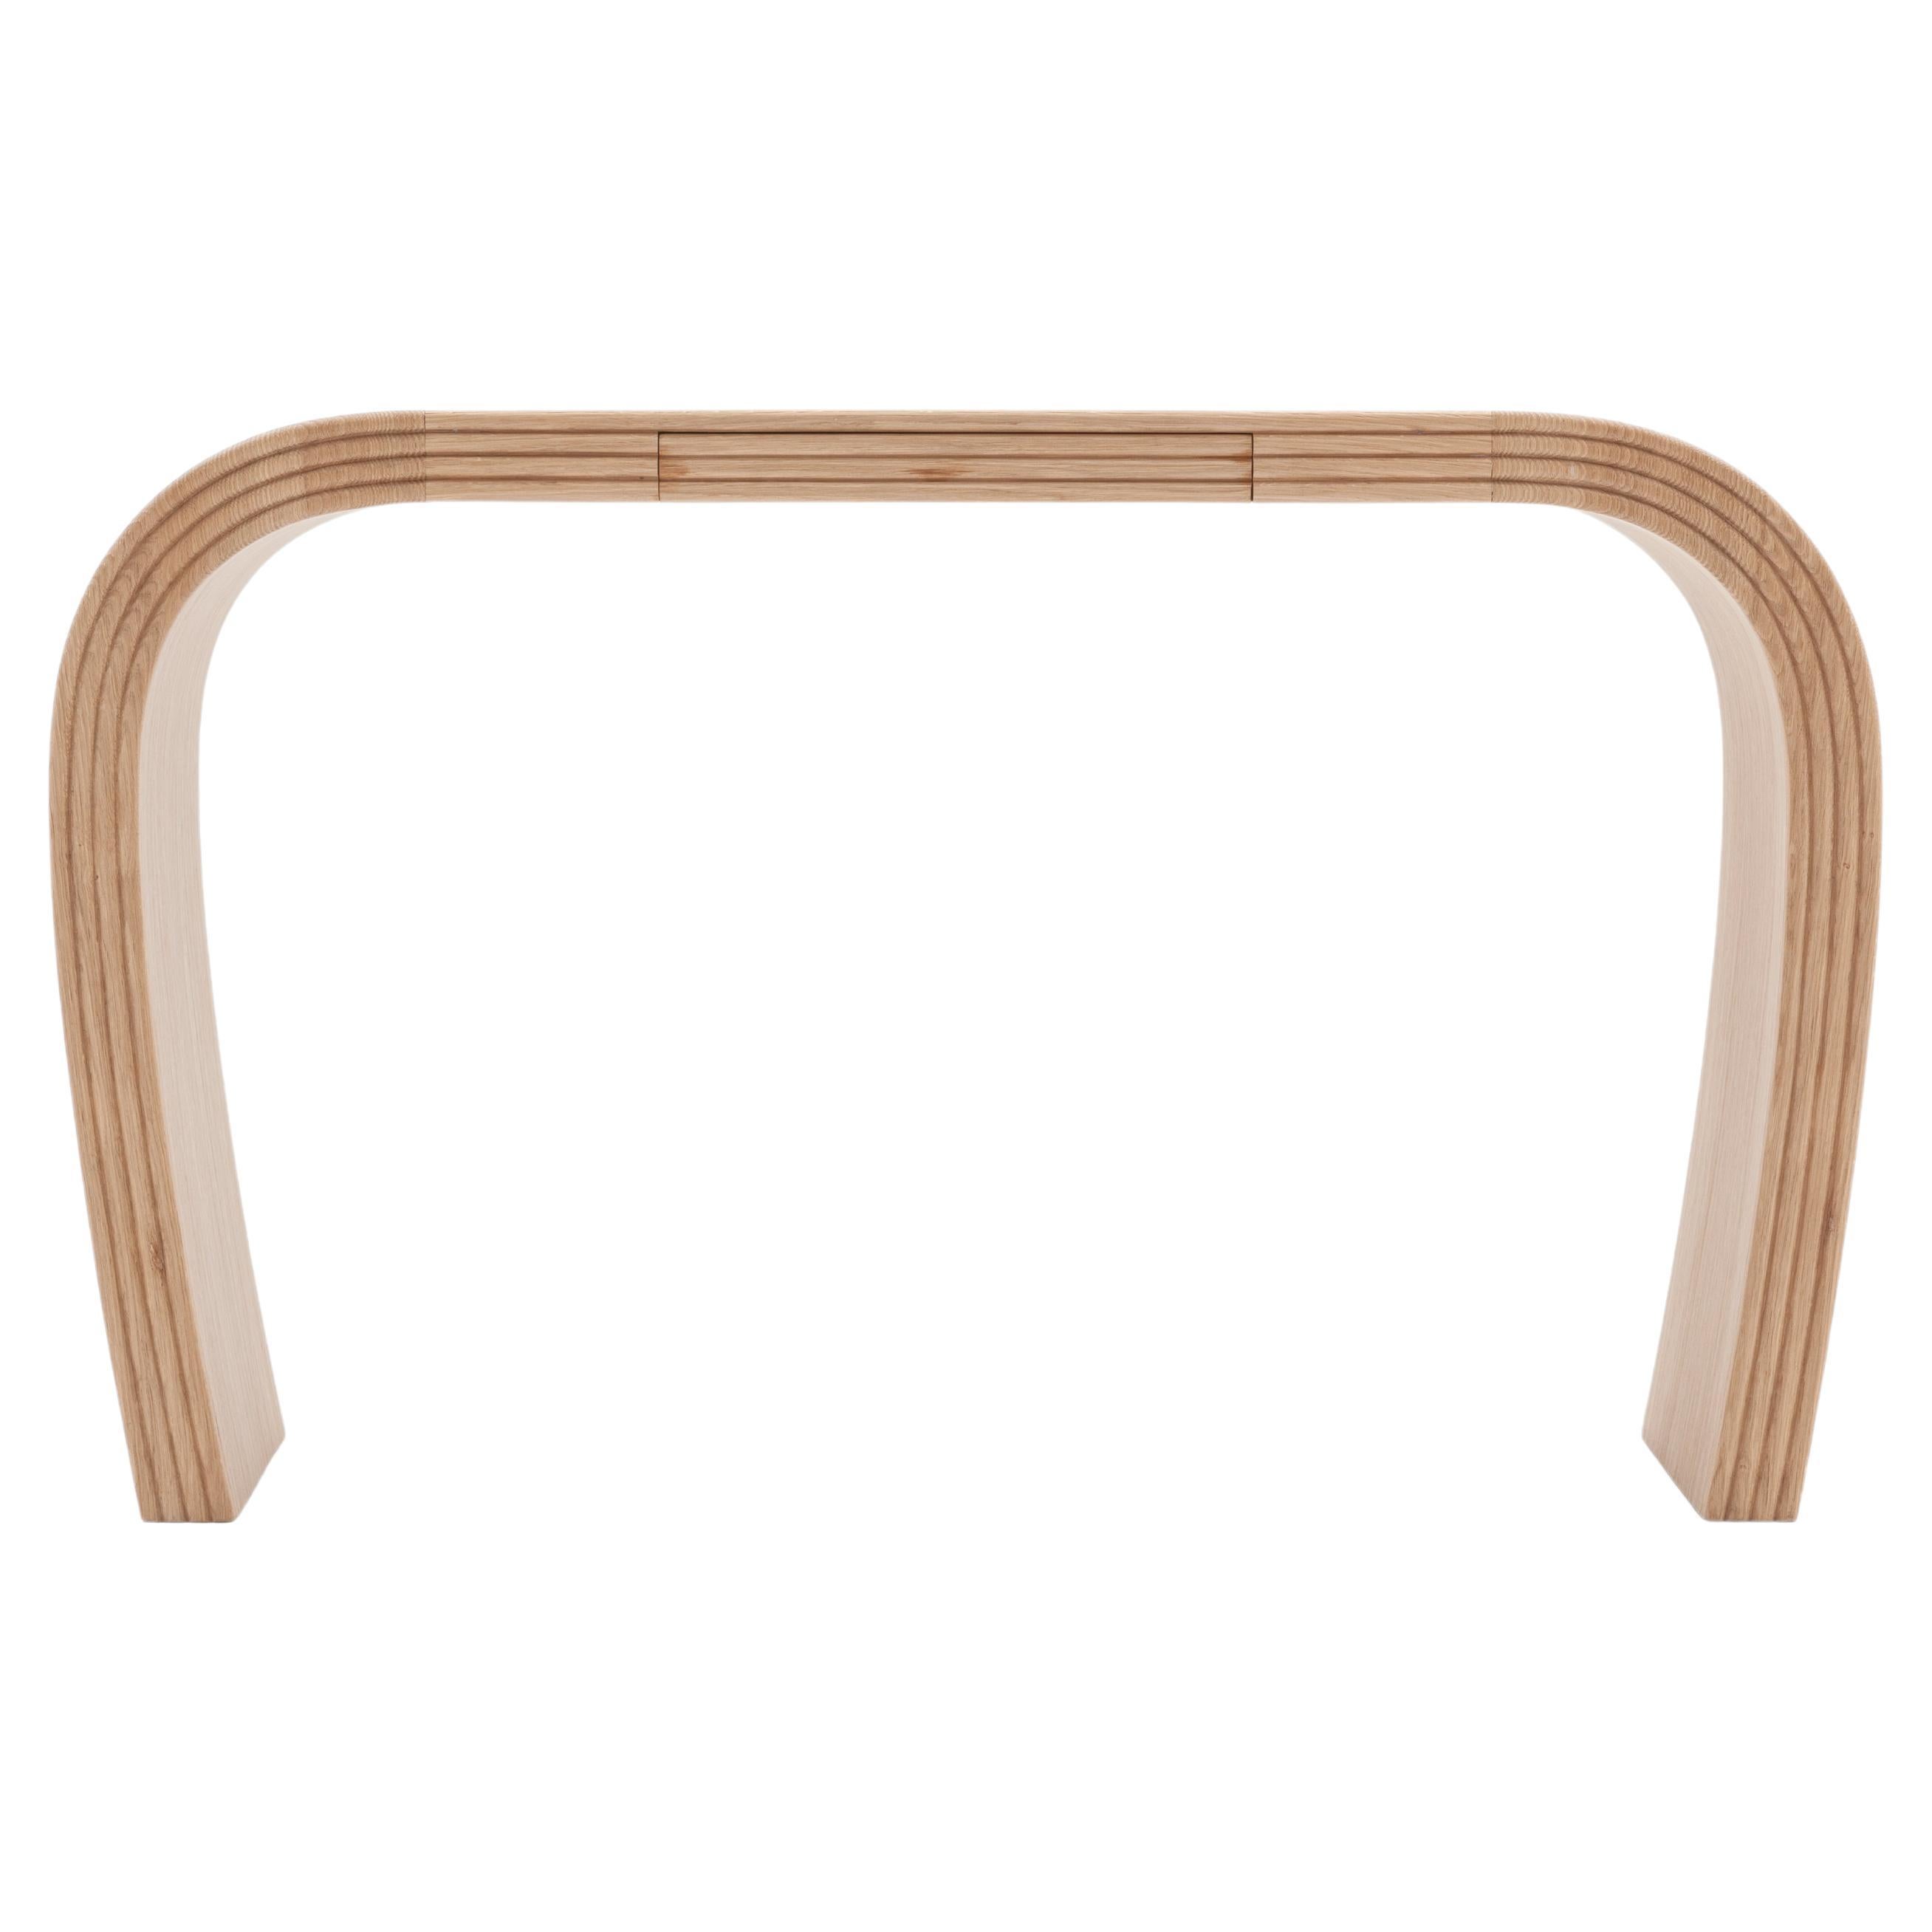 Otto handmade wood console table For Sale